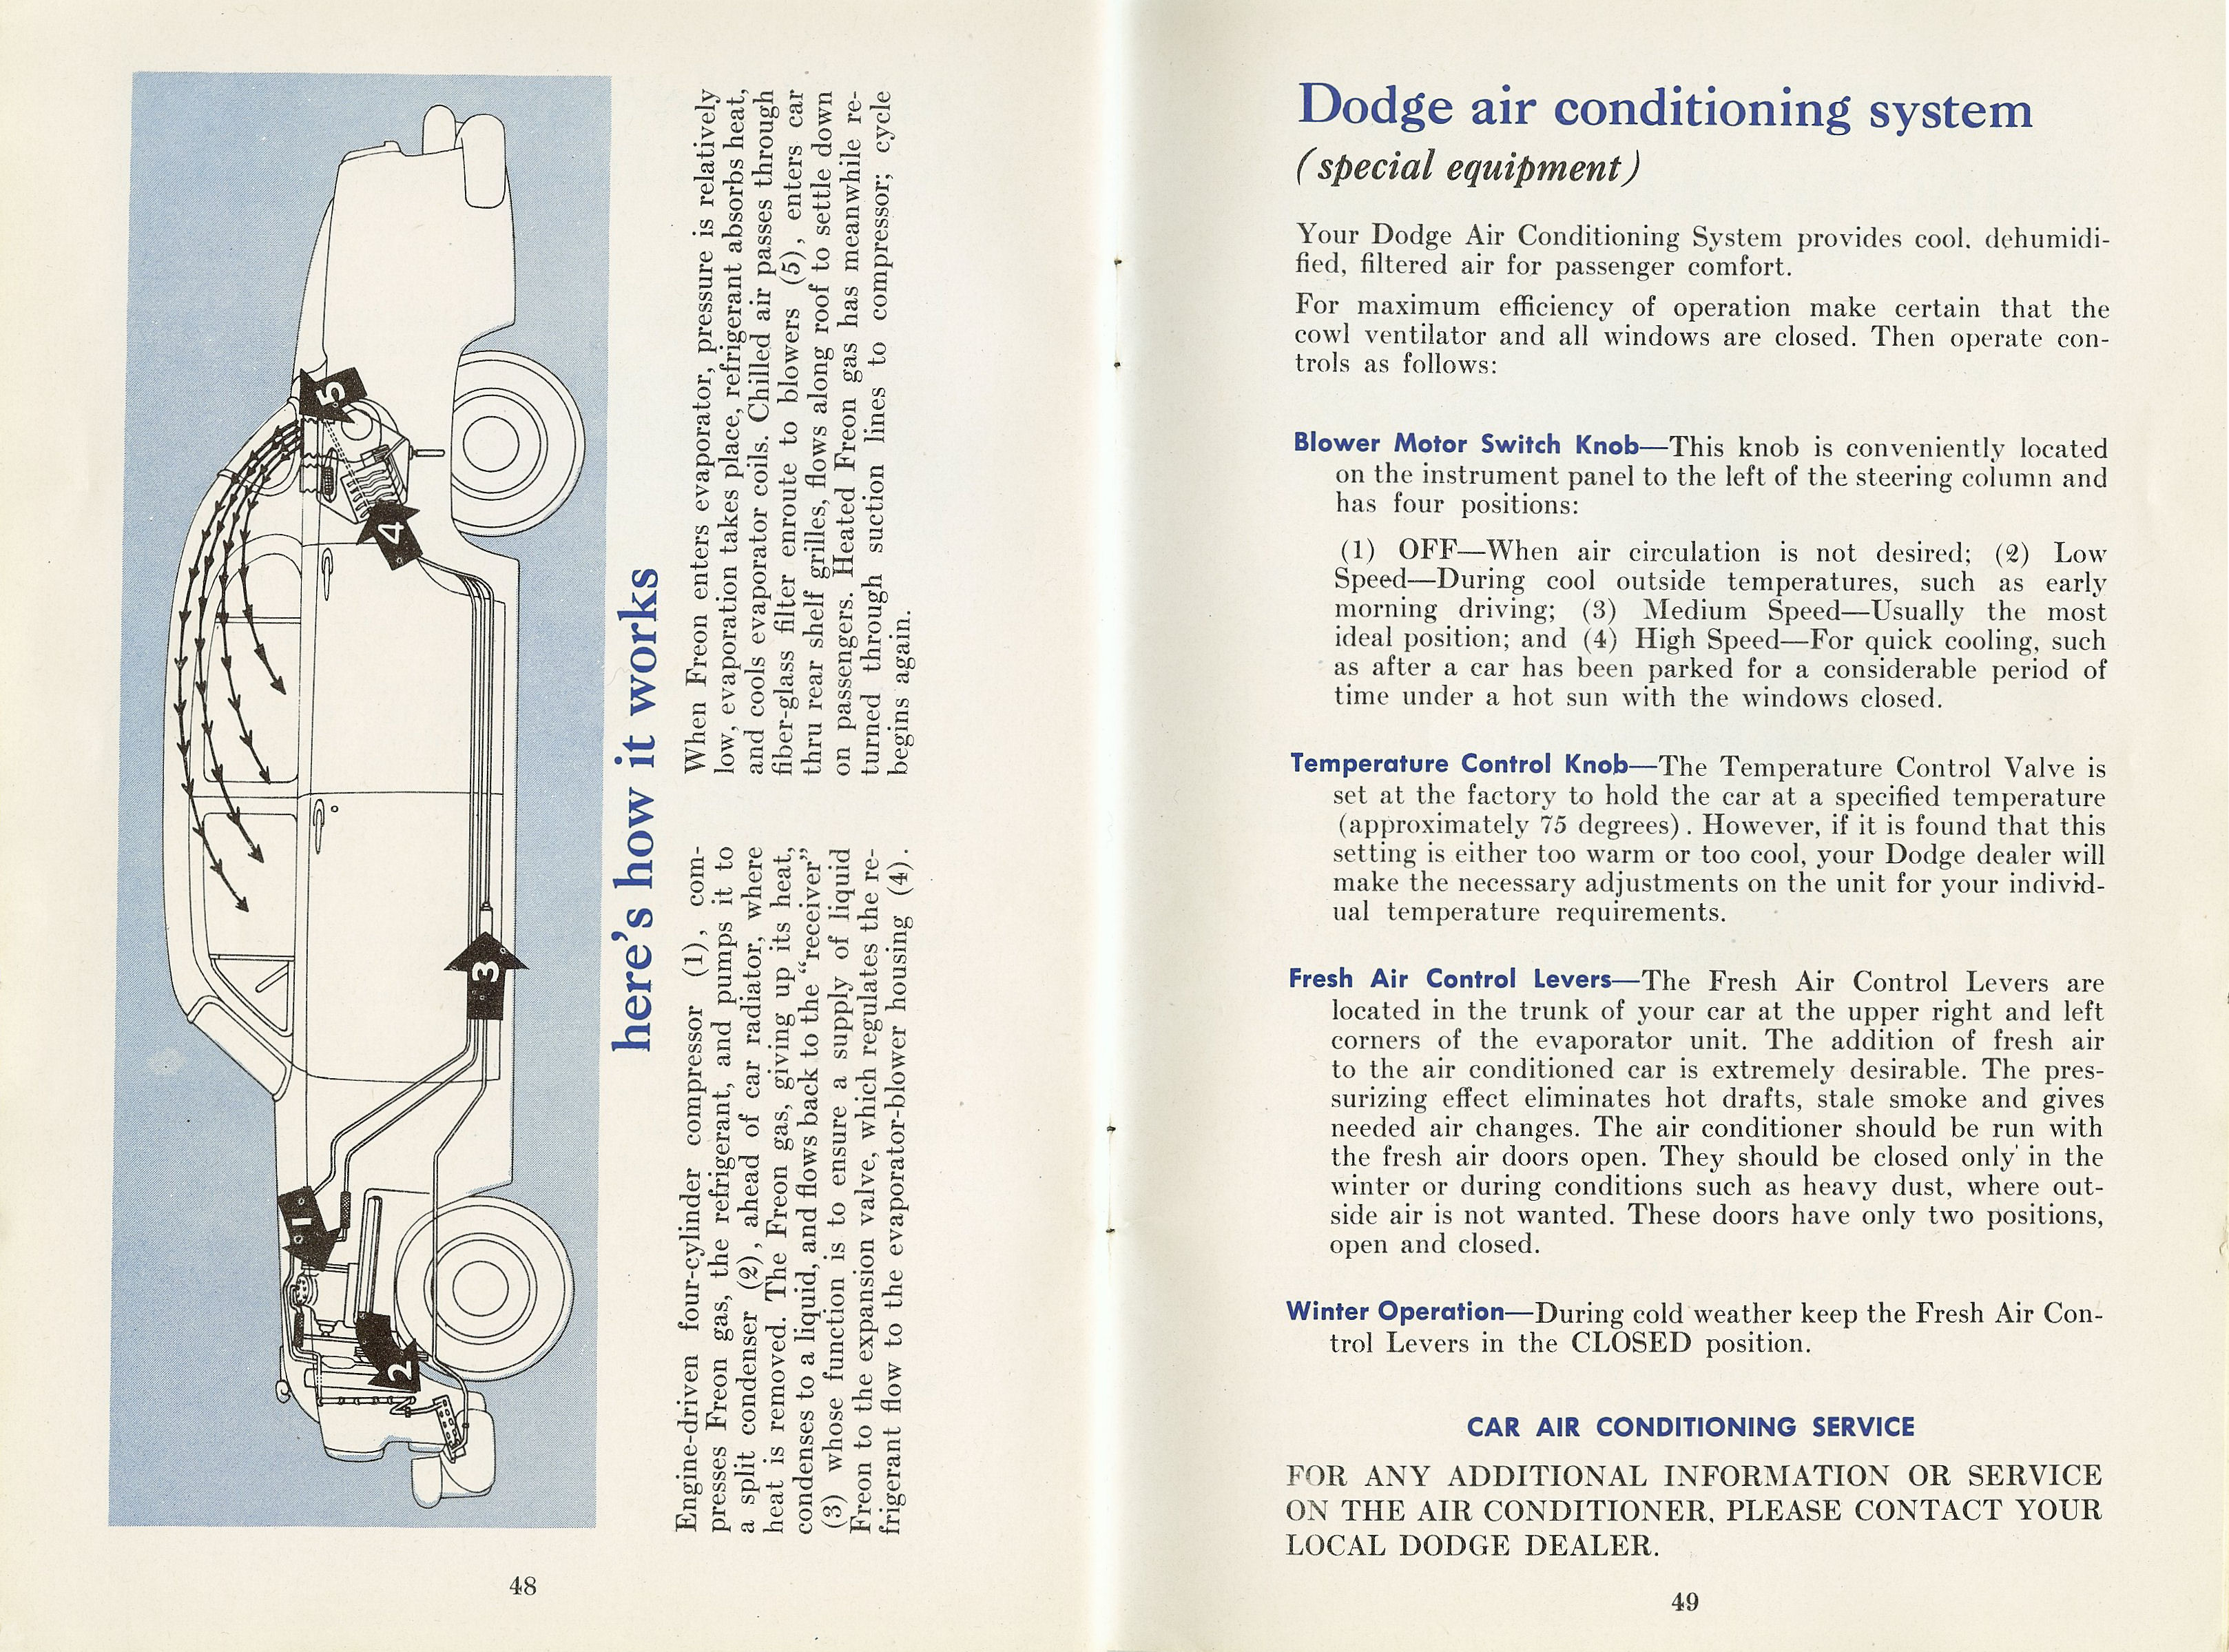 1954 Dodge Owners Manual-48-49